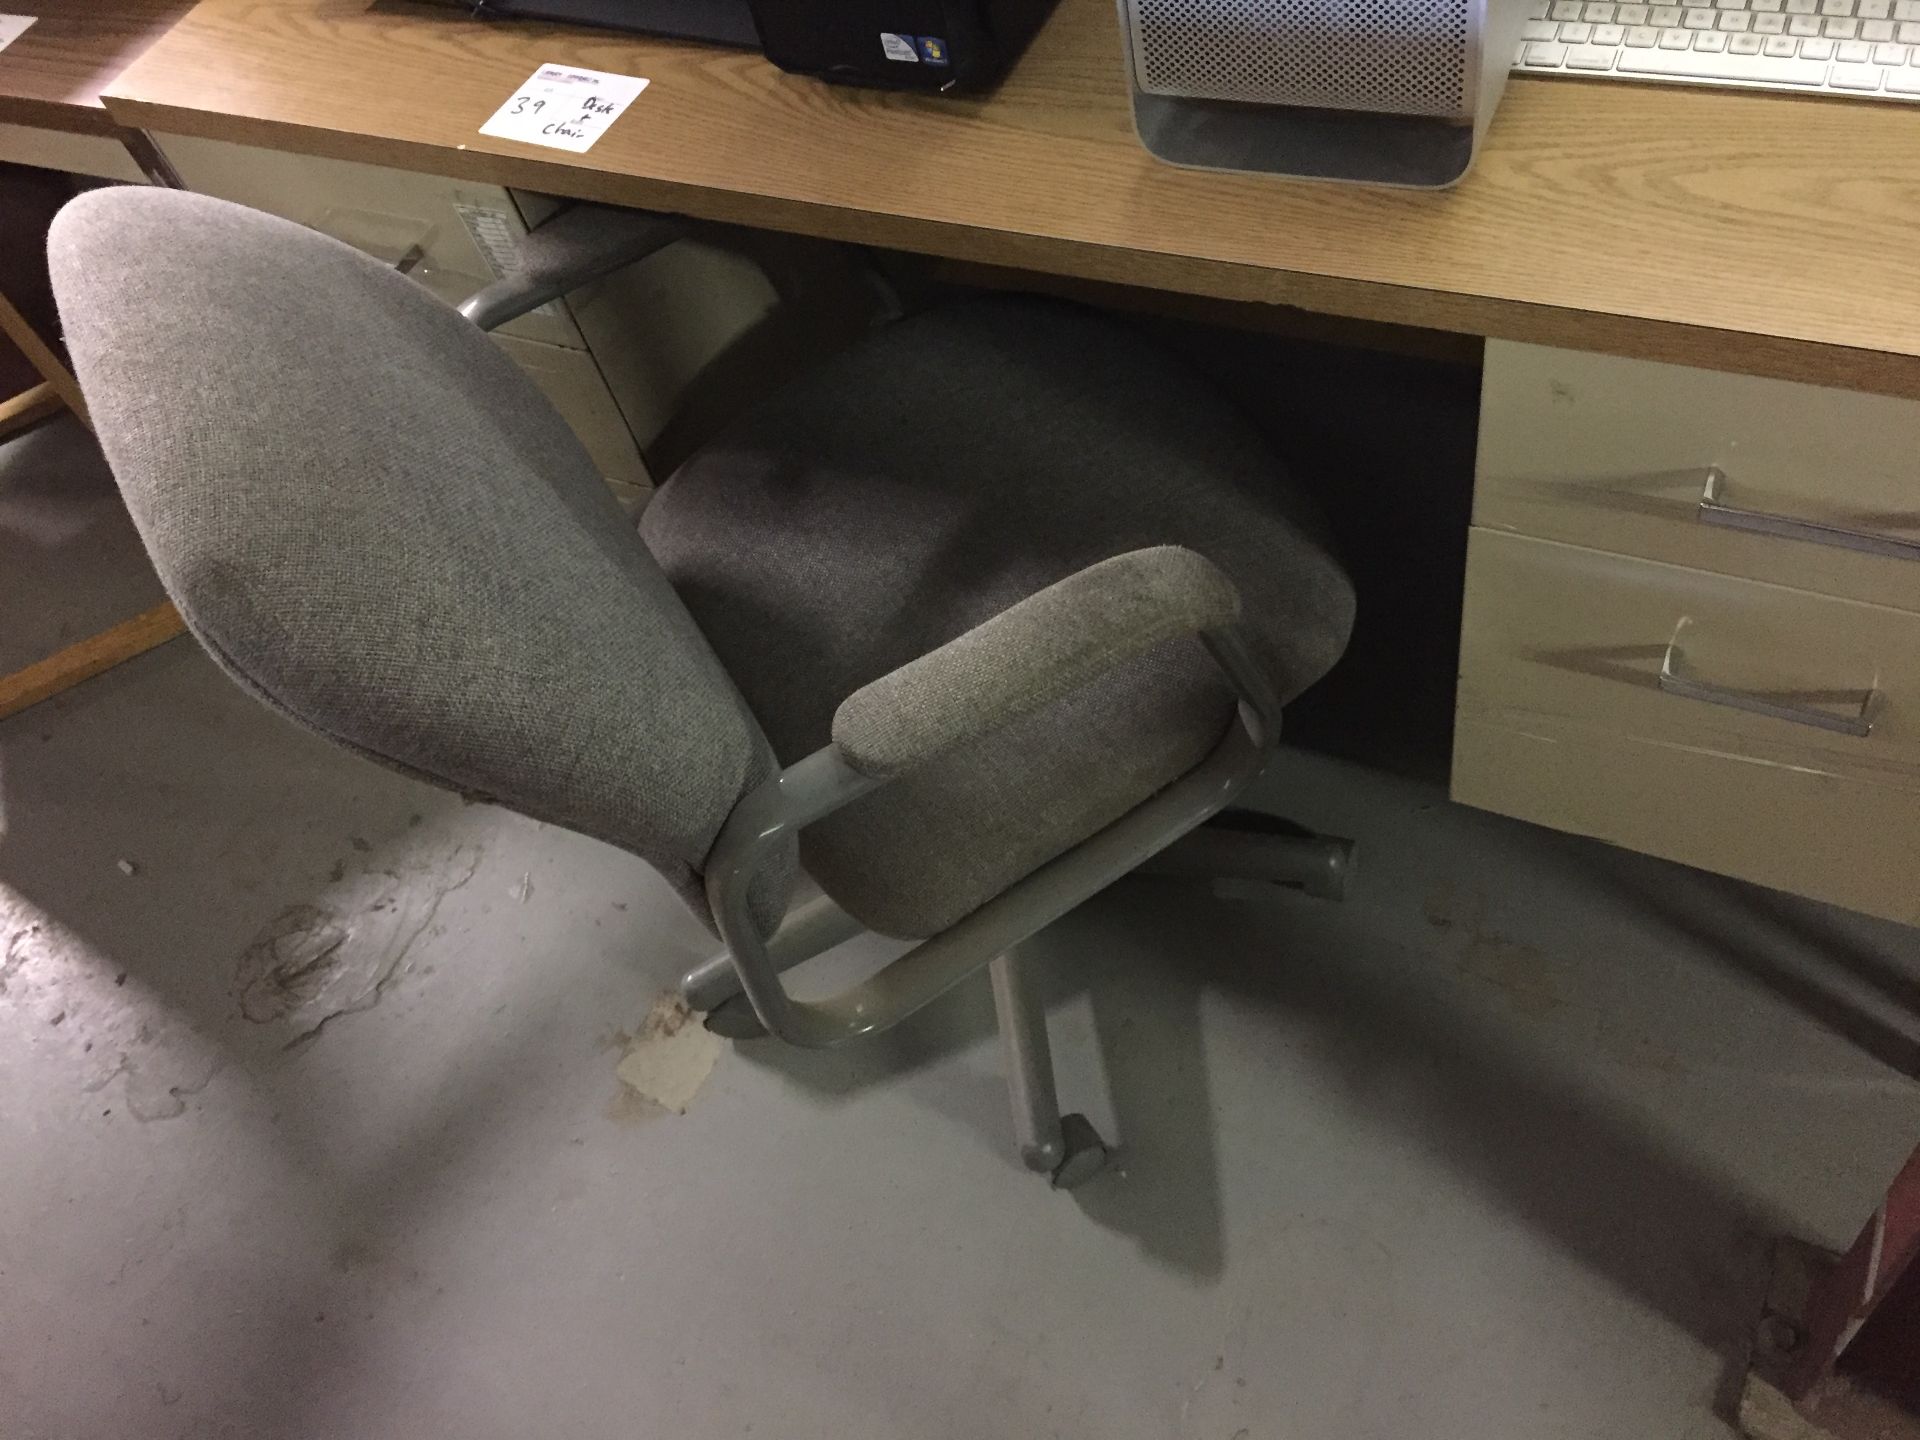 DESK AND CHAIR - 1PC